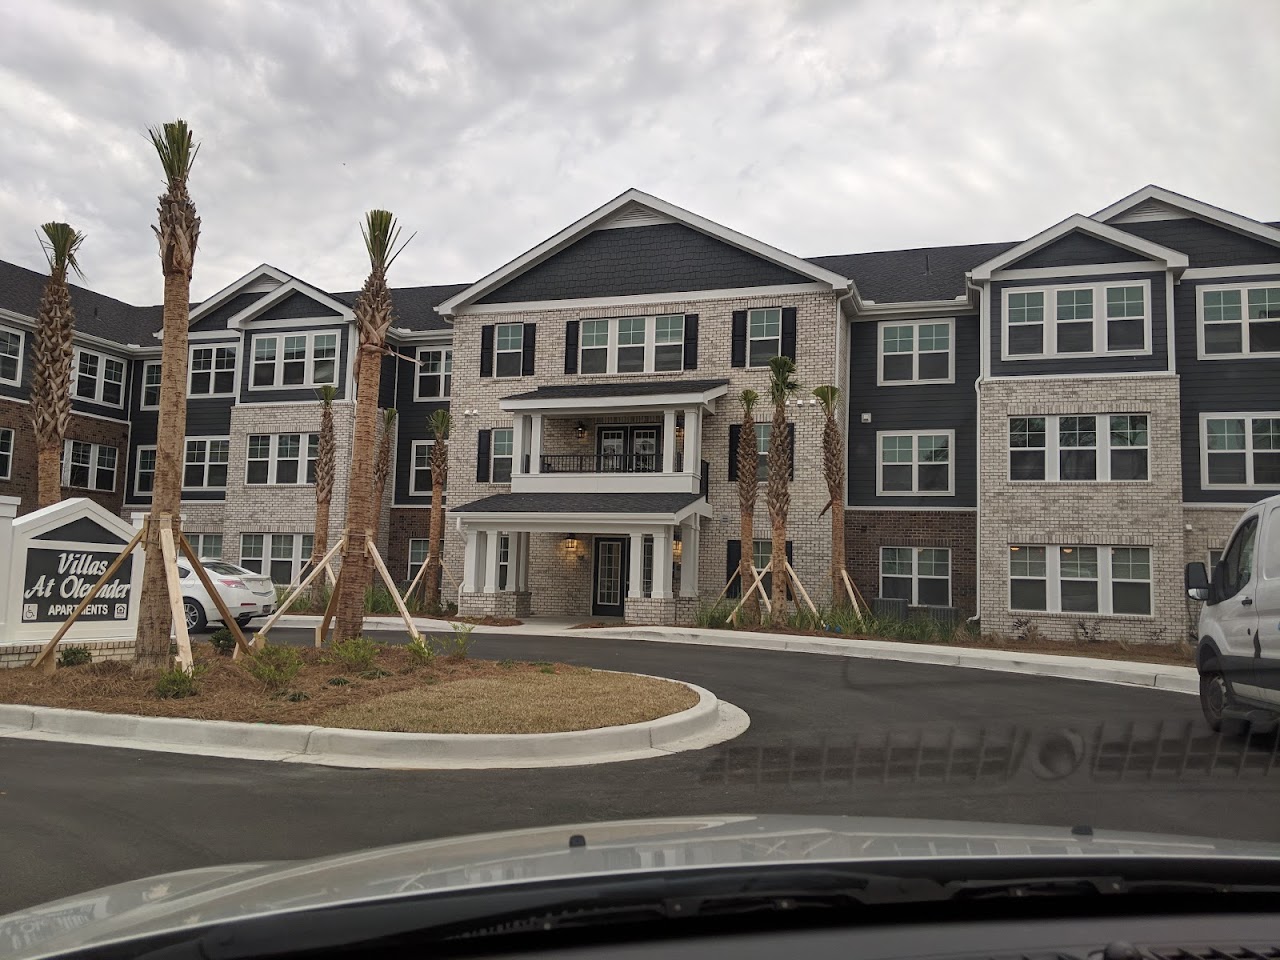 Photo of VILLAS AT OLEANDER. Affordable housing located at 3810 OLEANDER DRIVE MYRTLE BEACH, SC 29577